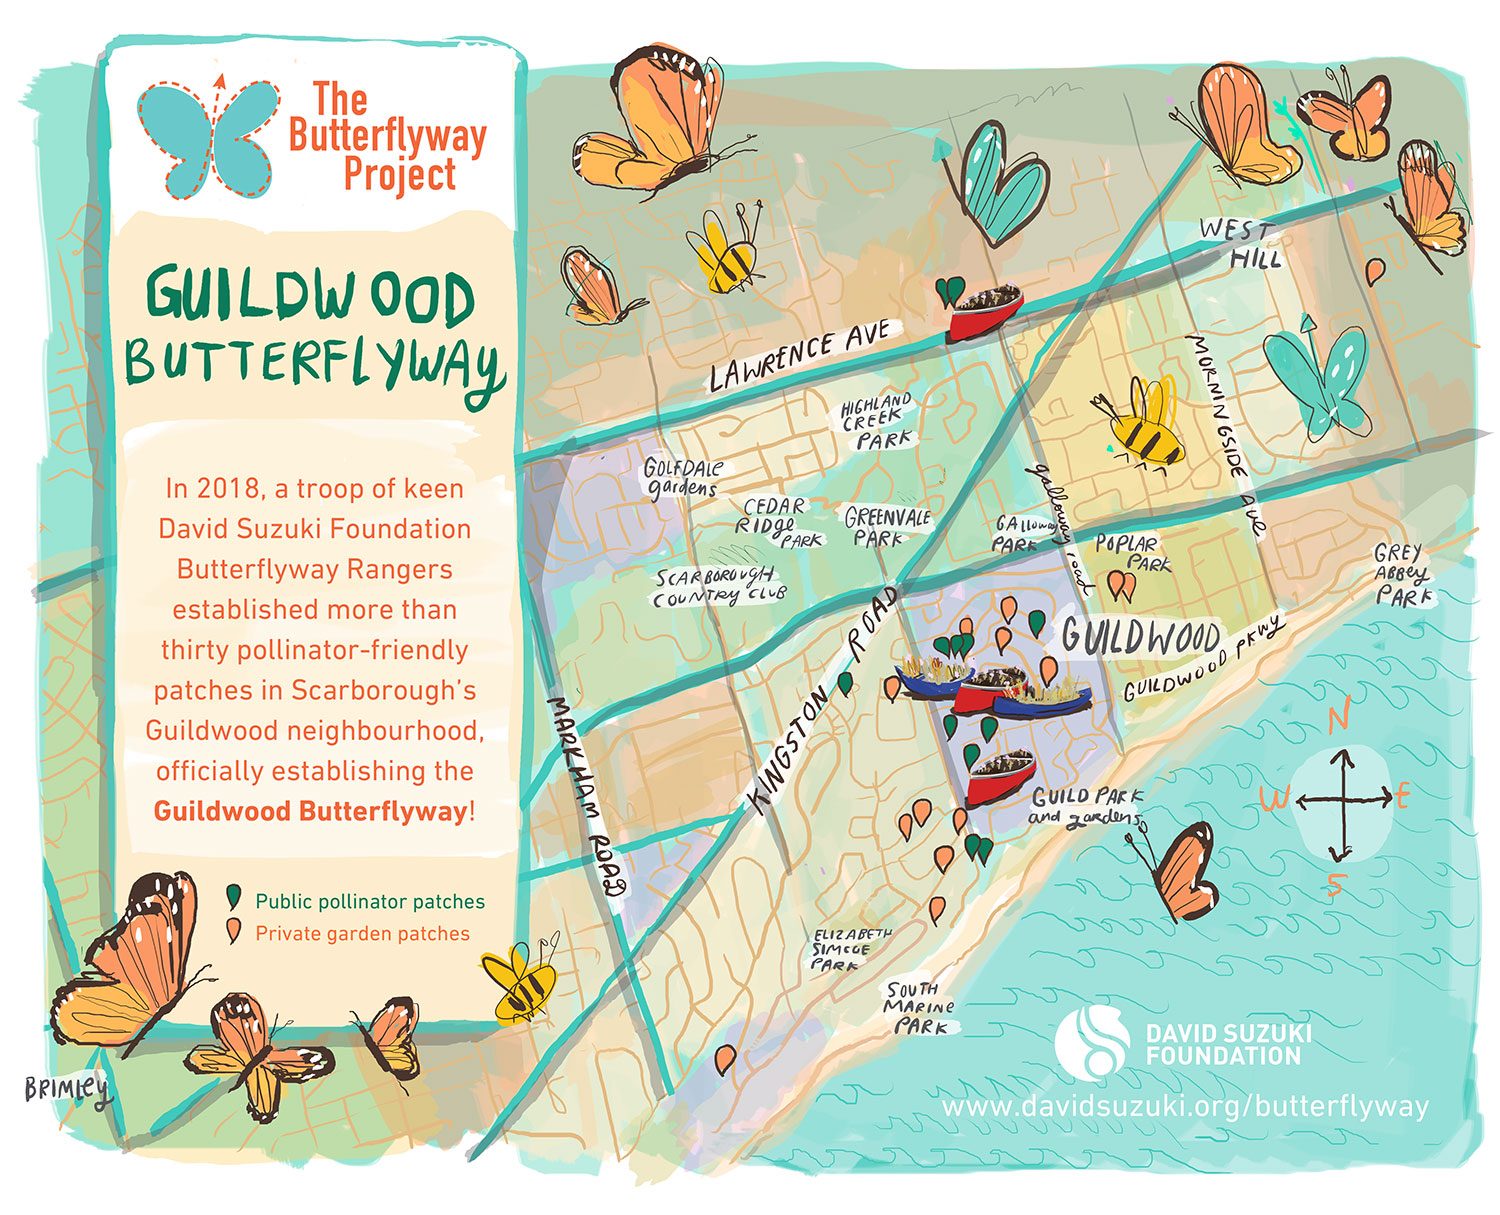 Scarborough Guildwood Butterflyway map